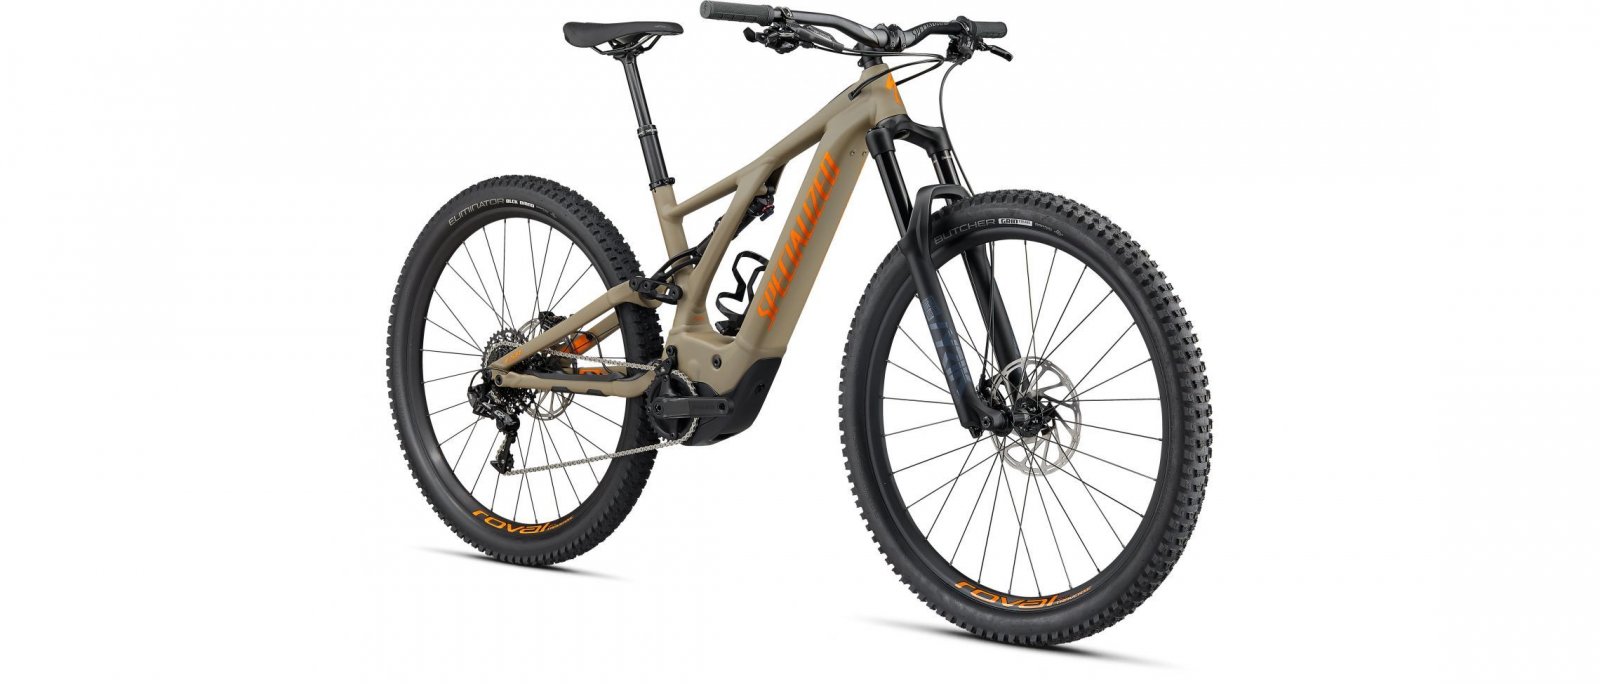 turbo-levo-comp-29-nb-electric-bicycle-mtb-specialized-2020-taupe-voodoo-orange.jpg